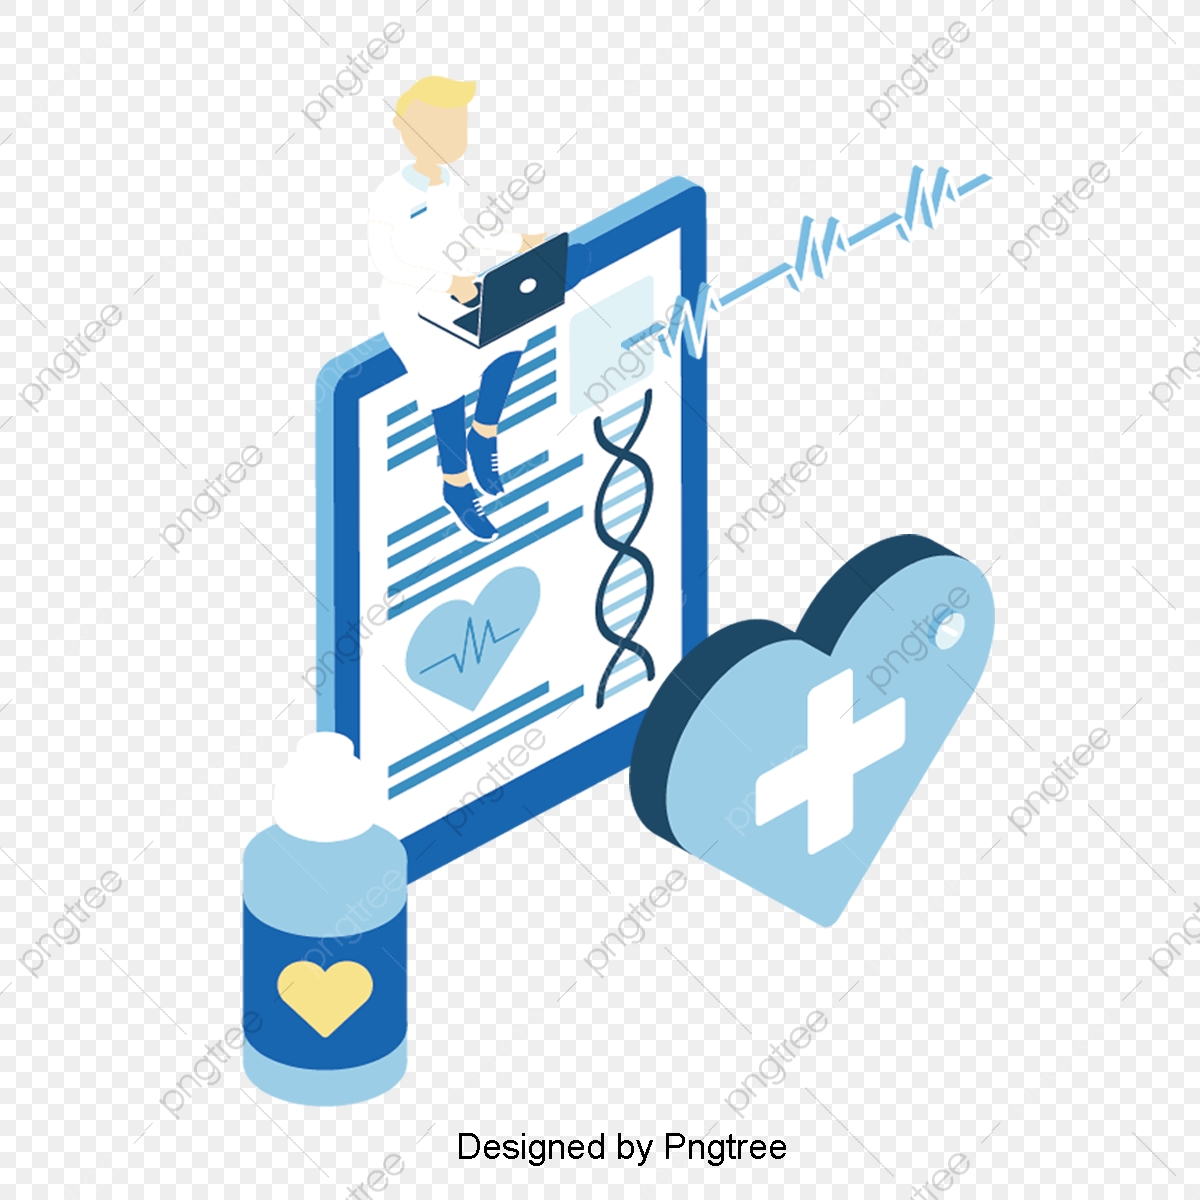 healthcare clipart medical science